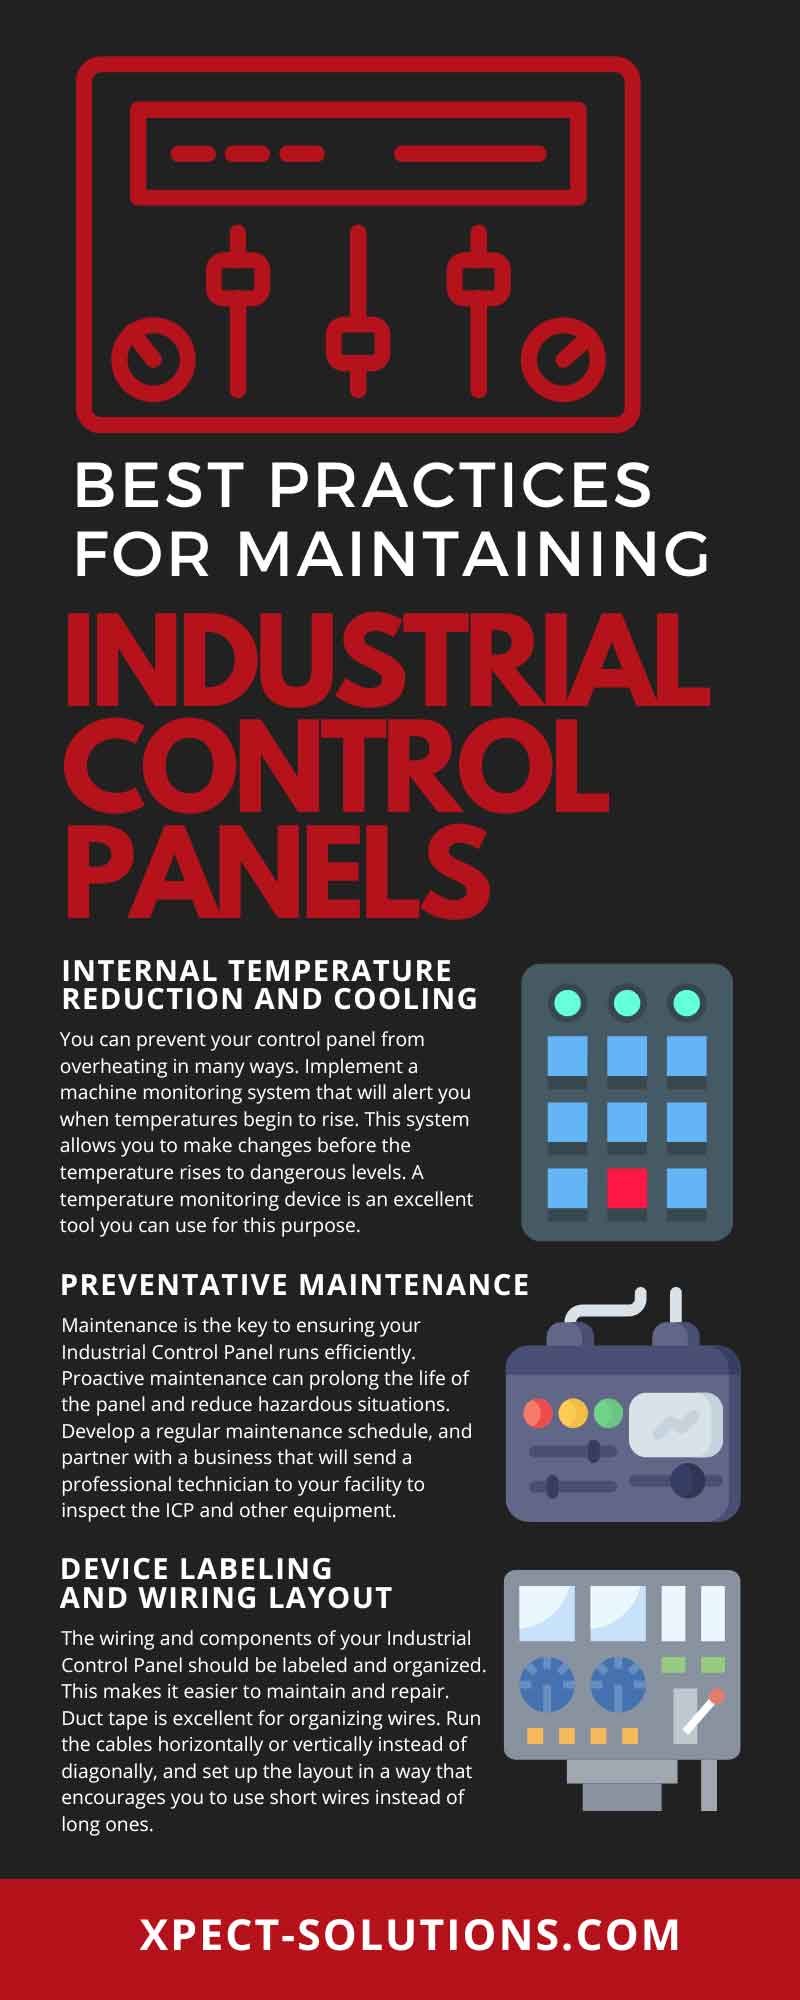 Best Practices for Maintaining Industrial Control Panels
